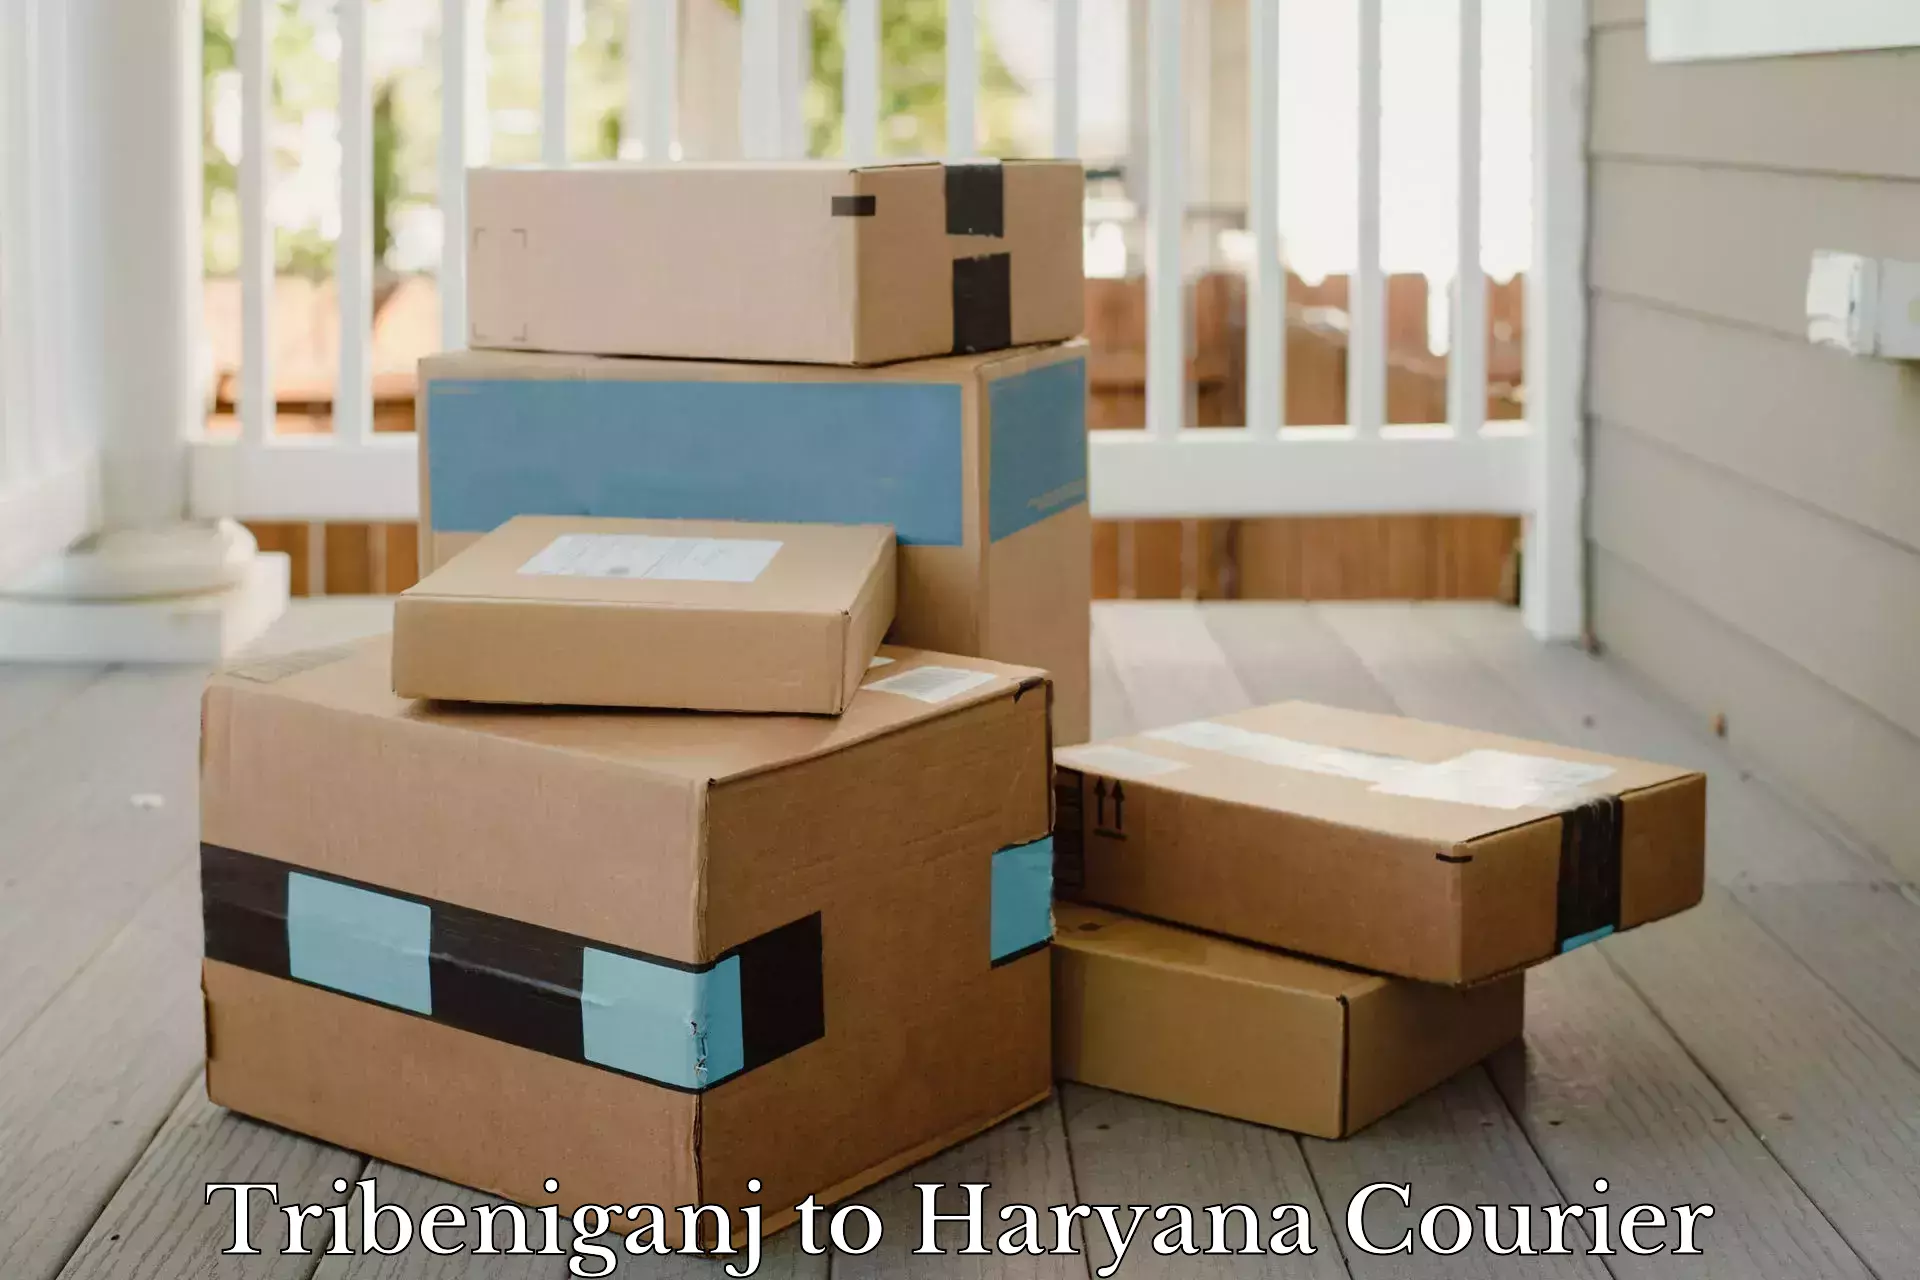 Reliable courier services Tribeniganj to Hansi